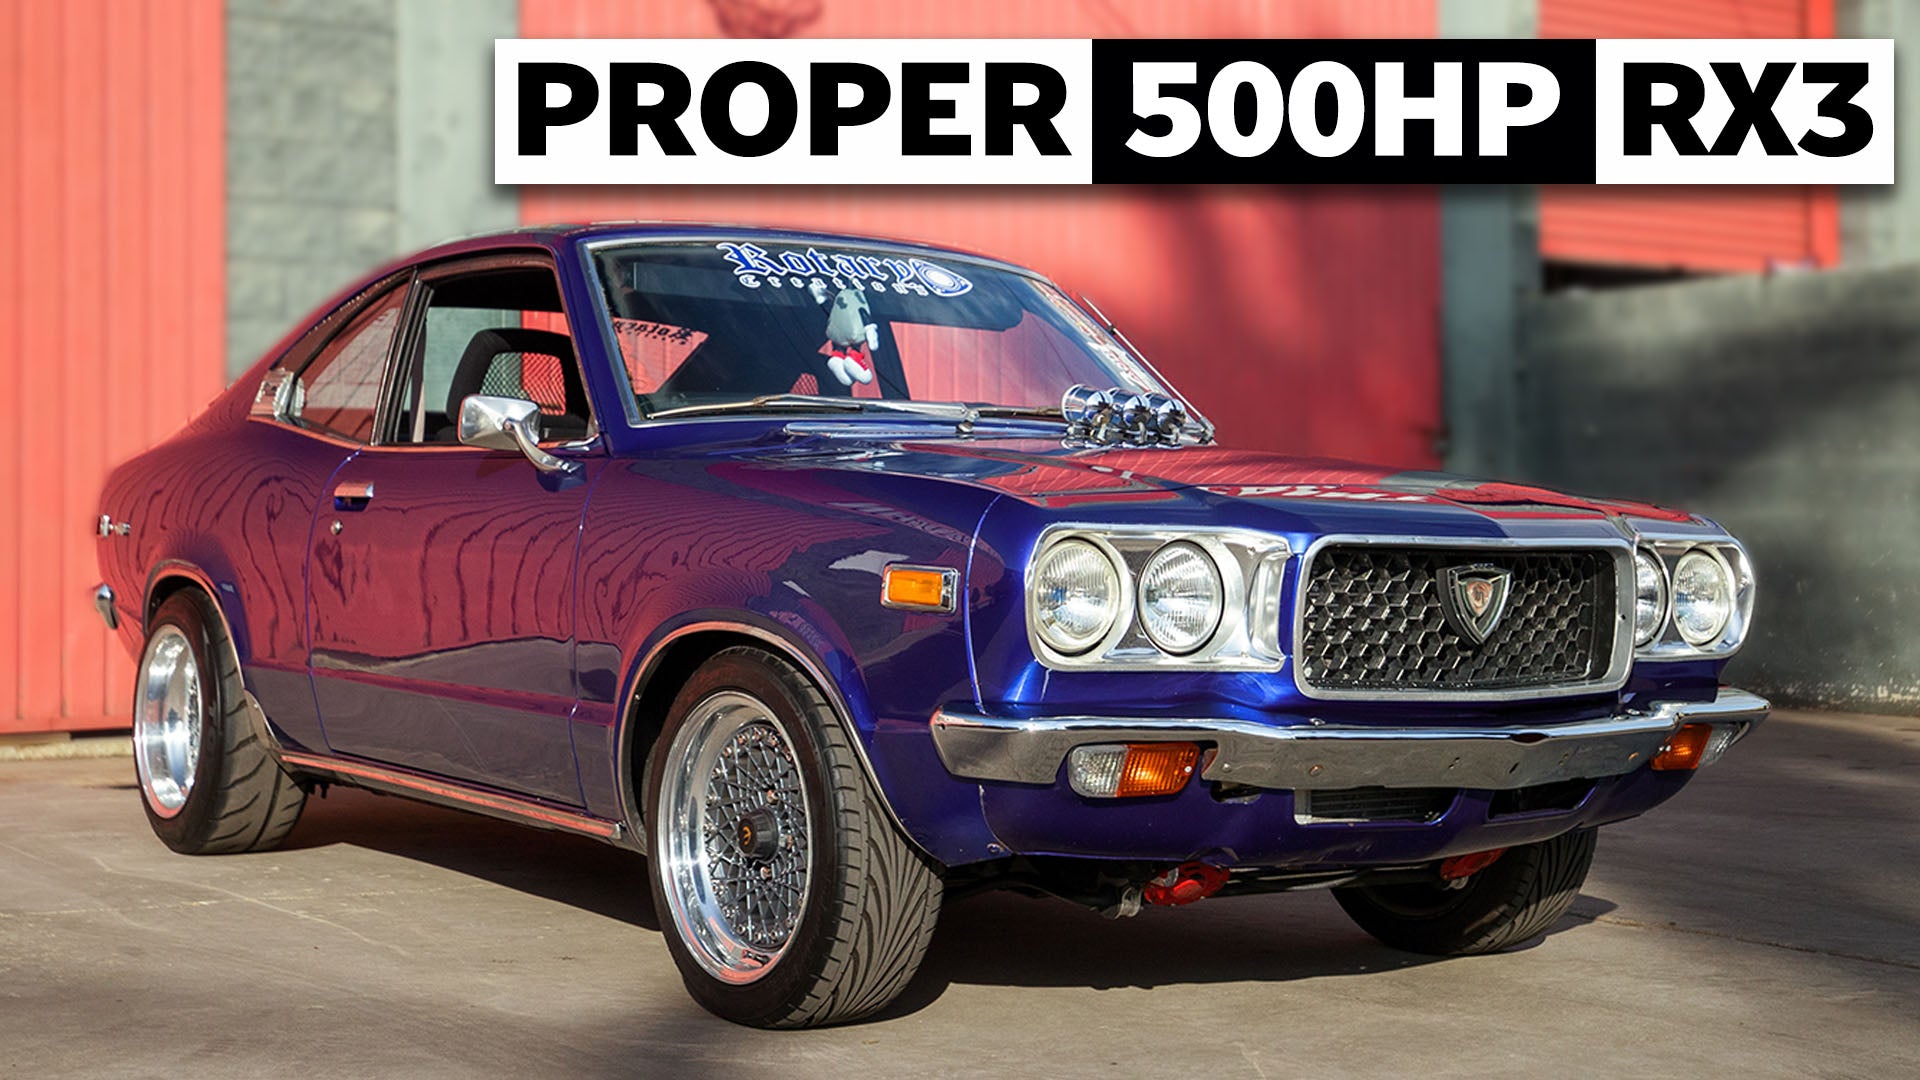 Over 500hp in a 13b Swapped Mazda RX-3 is absolute Madness